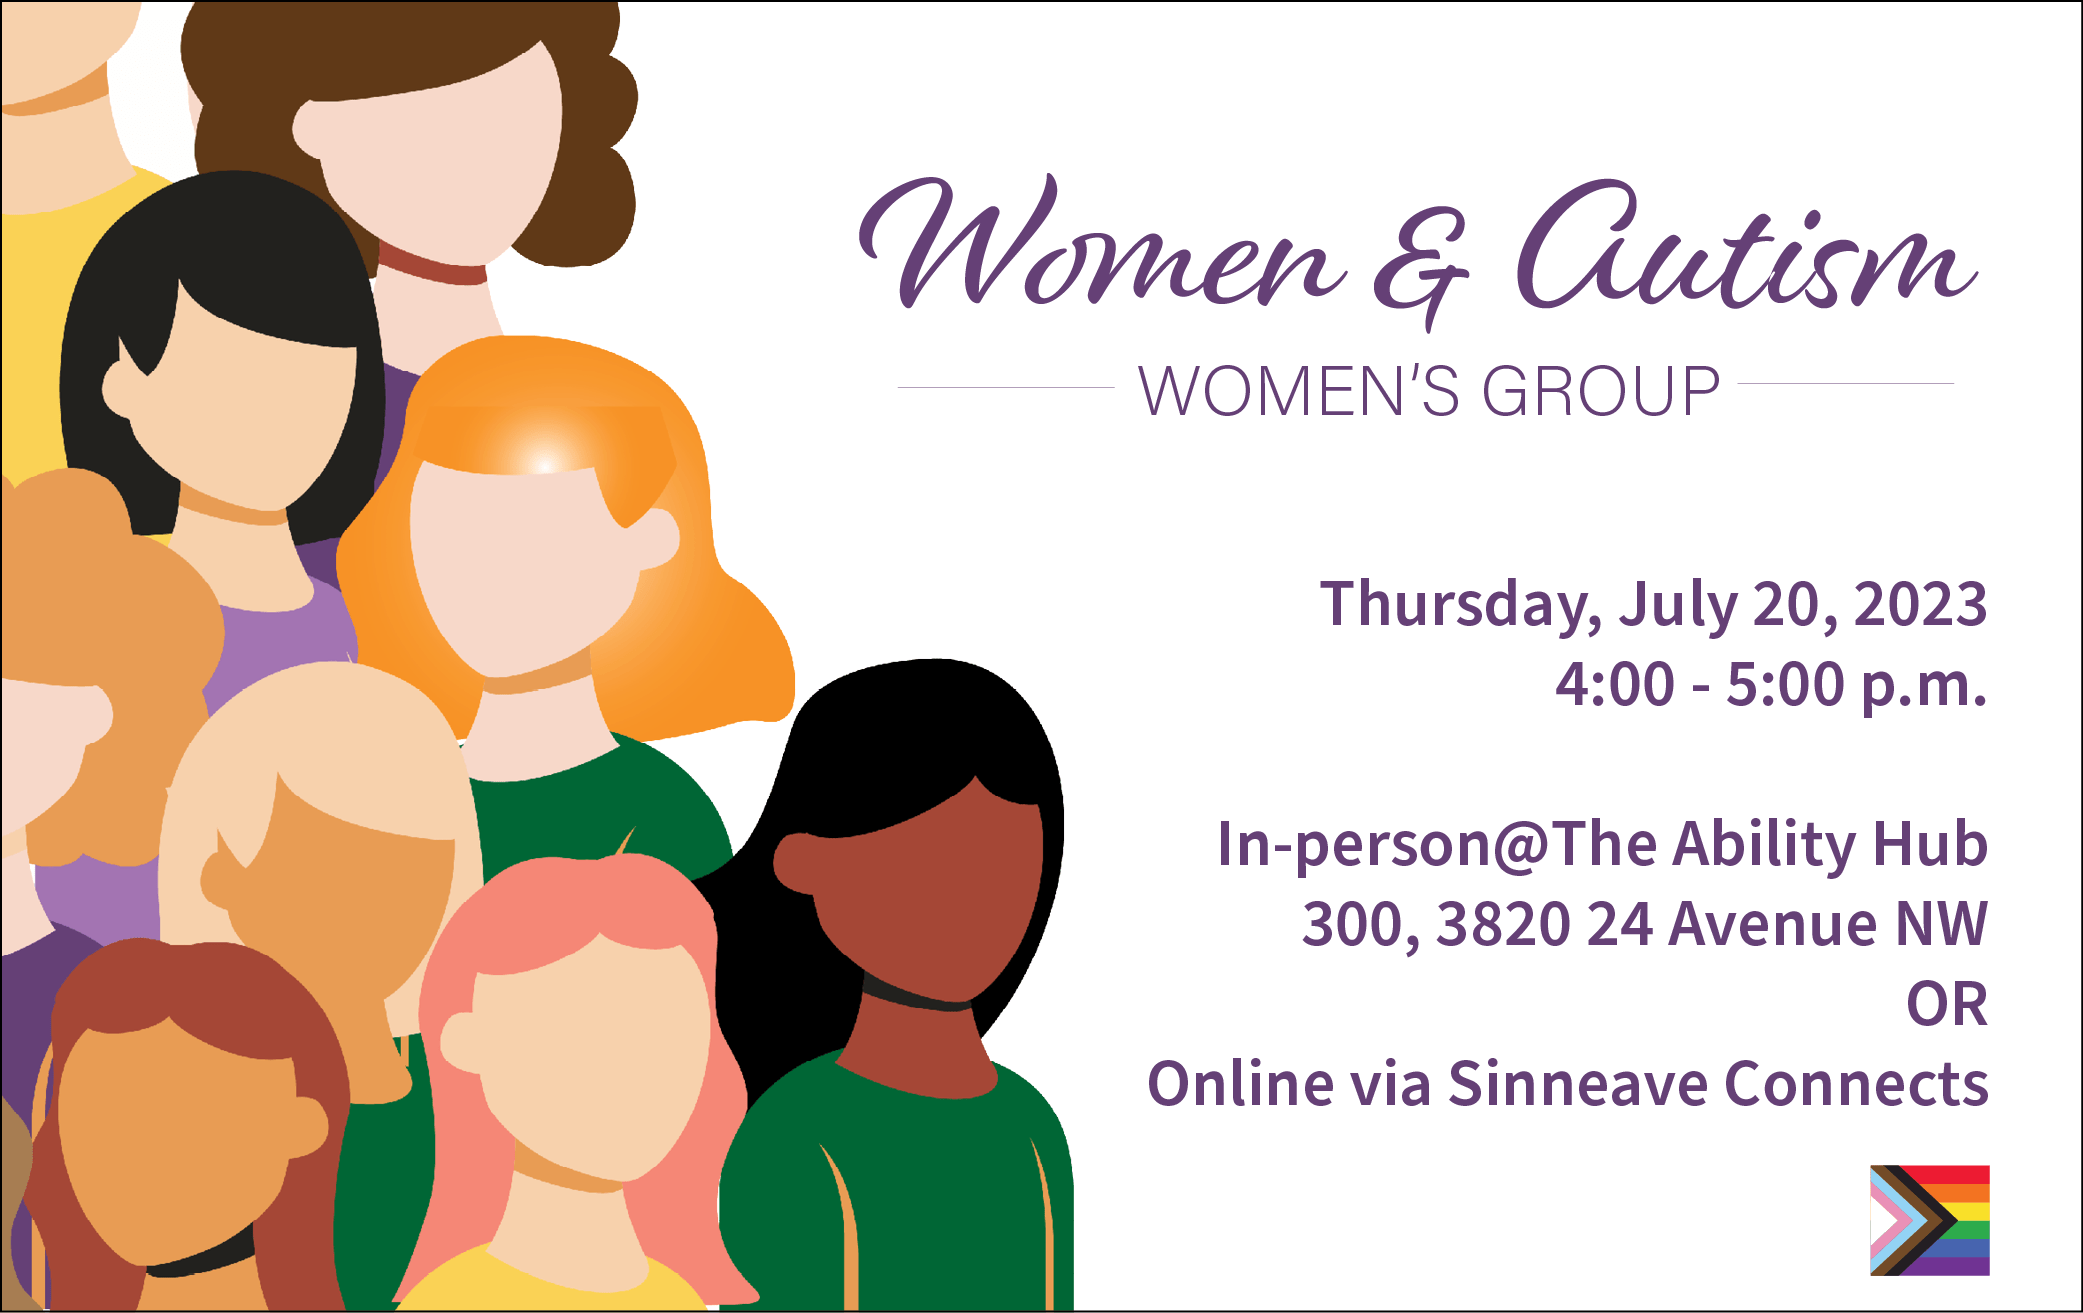 The image features several women in a group, all shapes, sizes and colours. The text reads, Women & Autism Women's Group along with event information.